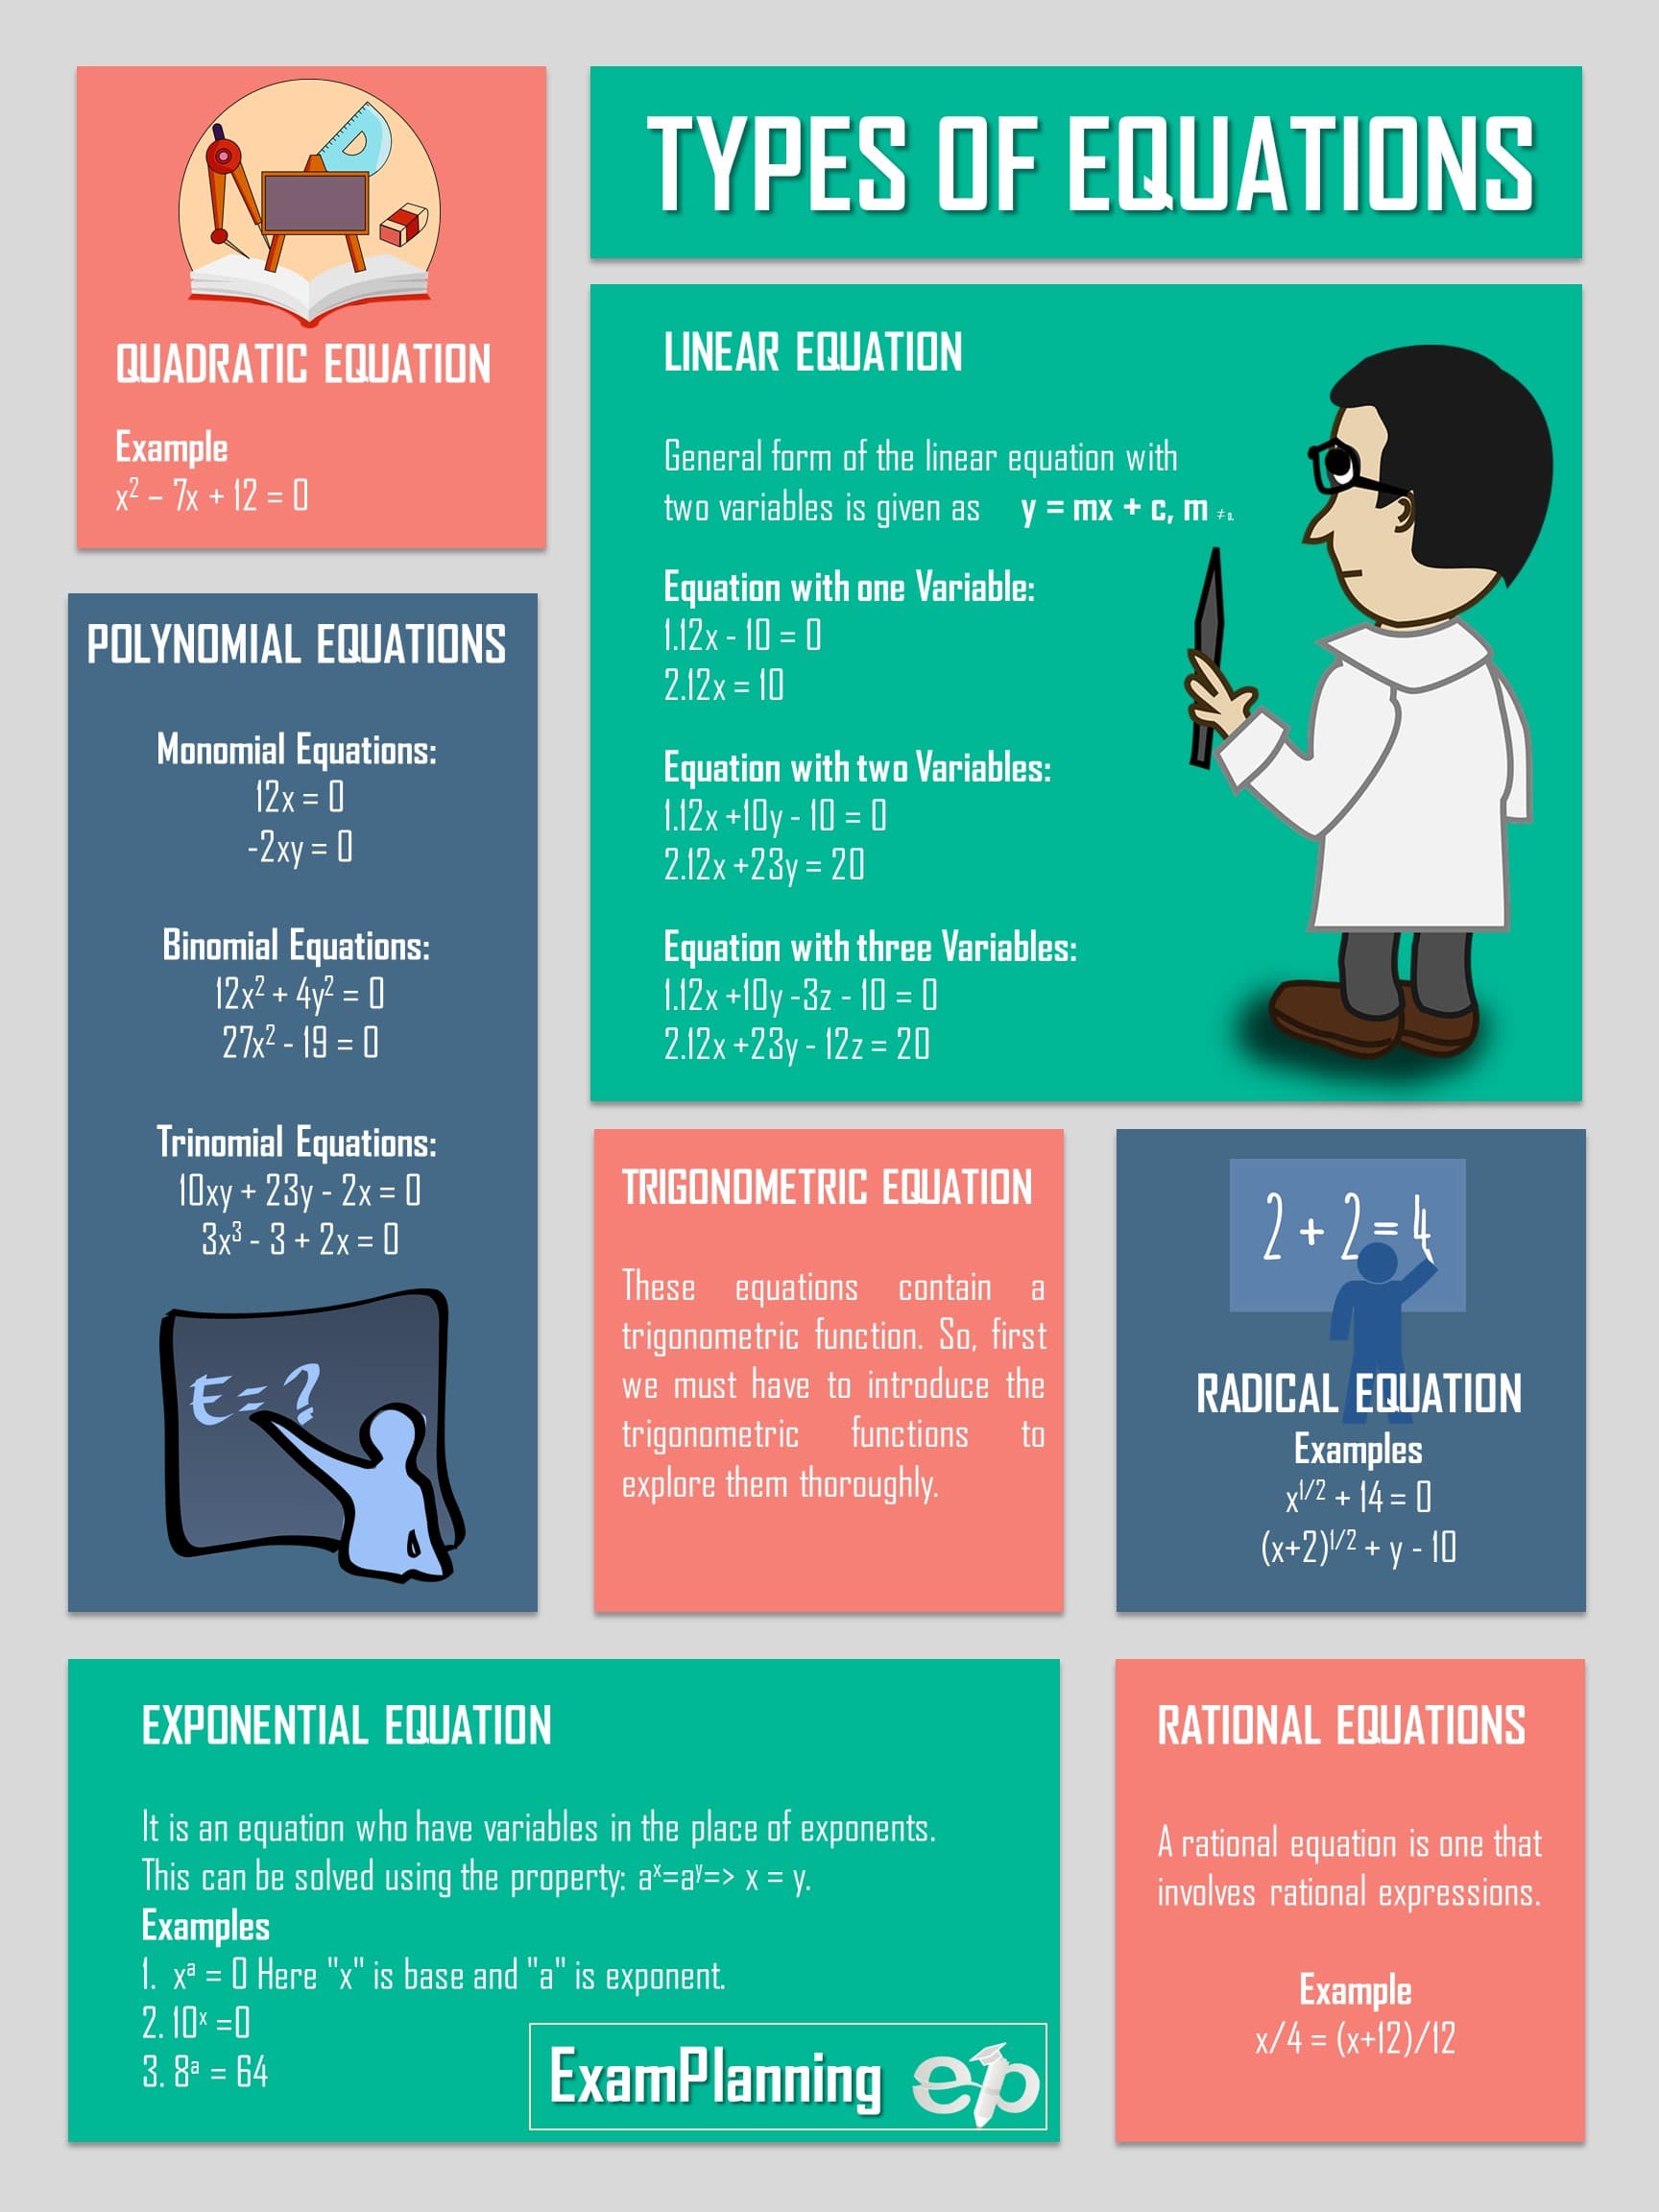 types-of-equations-and-examples-examplanning